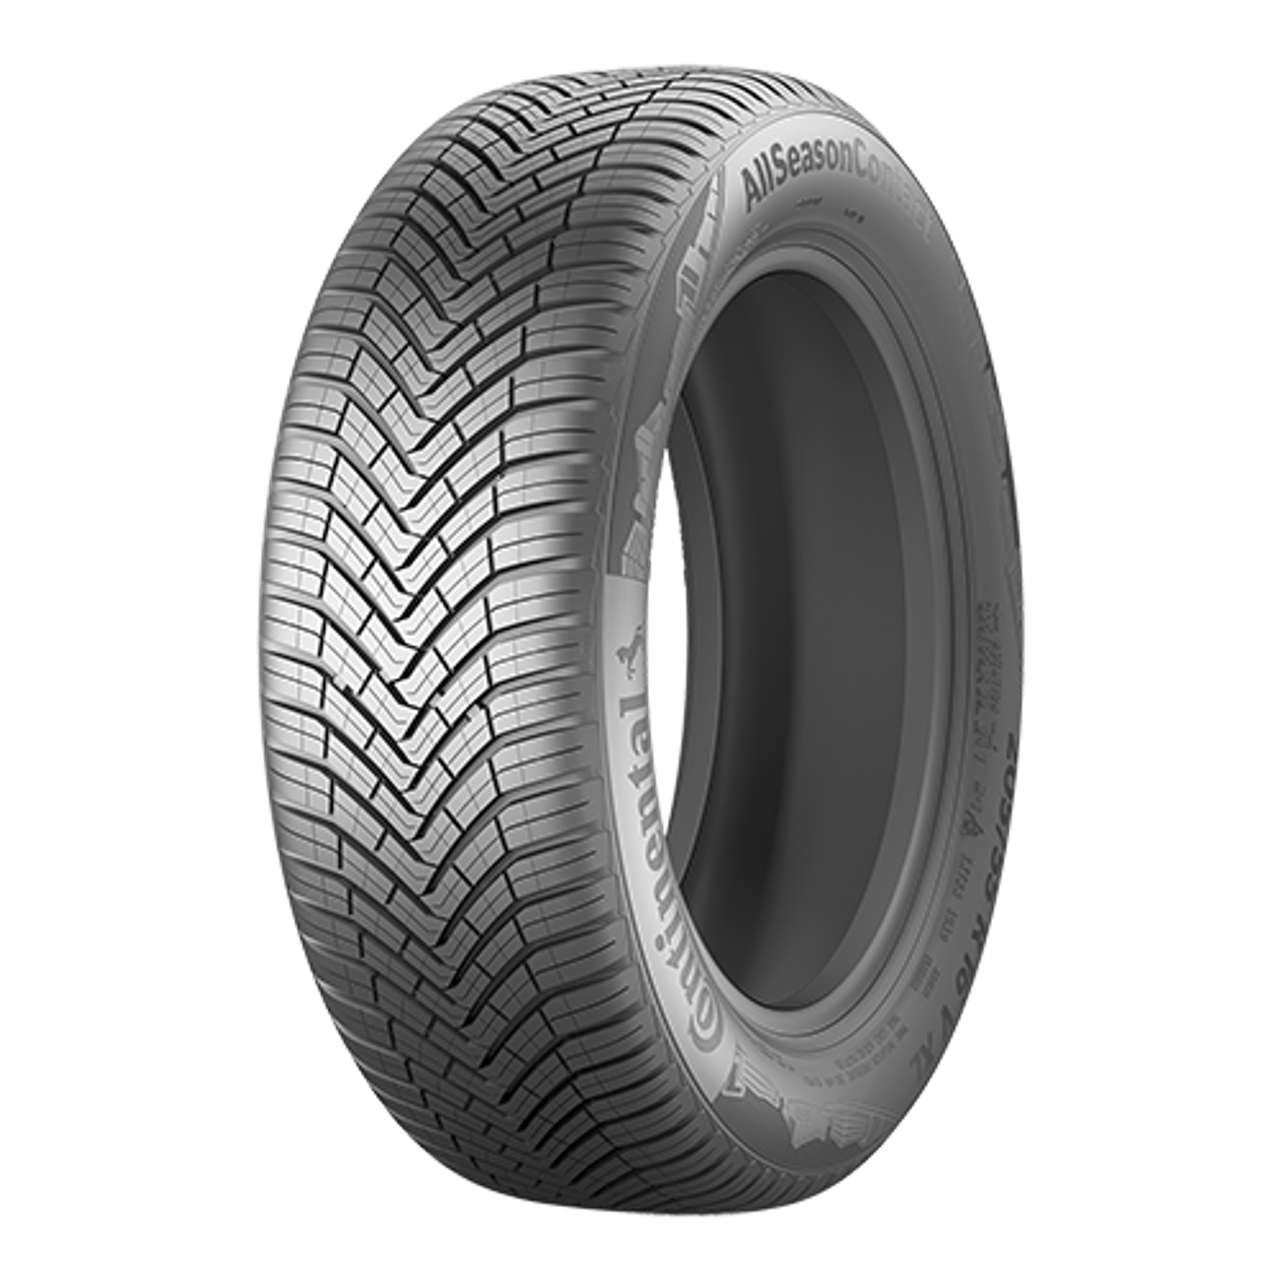 CONTINENTAL ALLSEASONCONTACT (EVc) 235/55R18 104V BSW